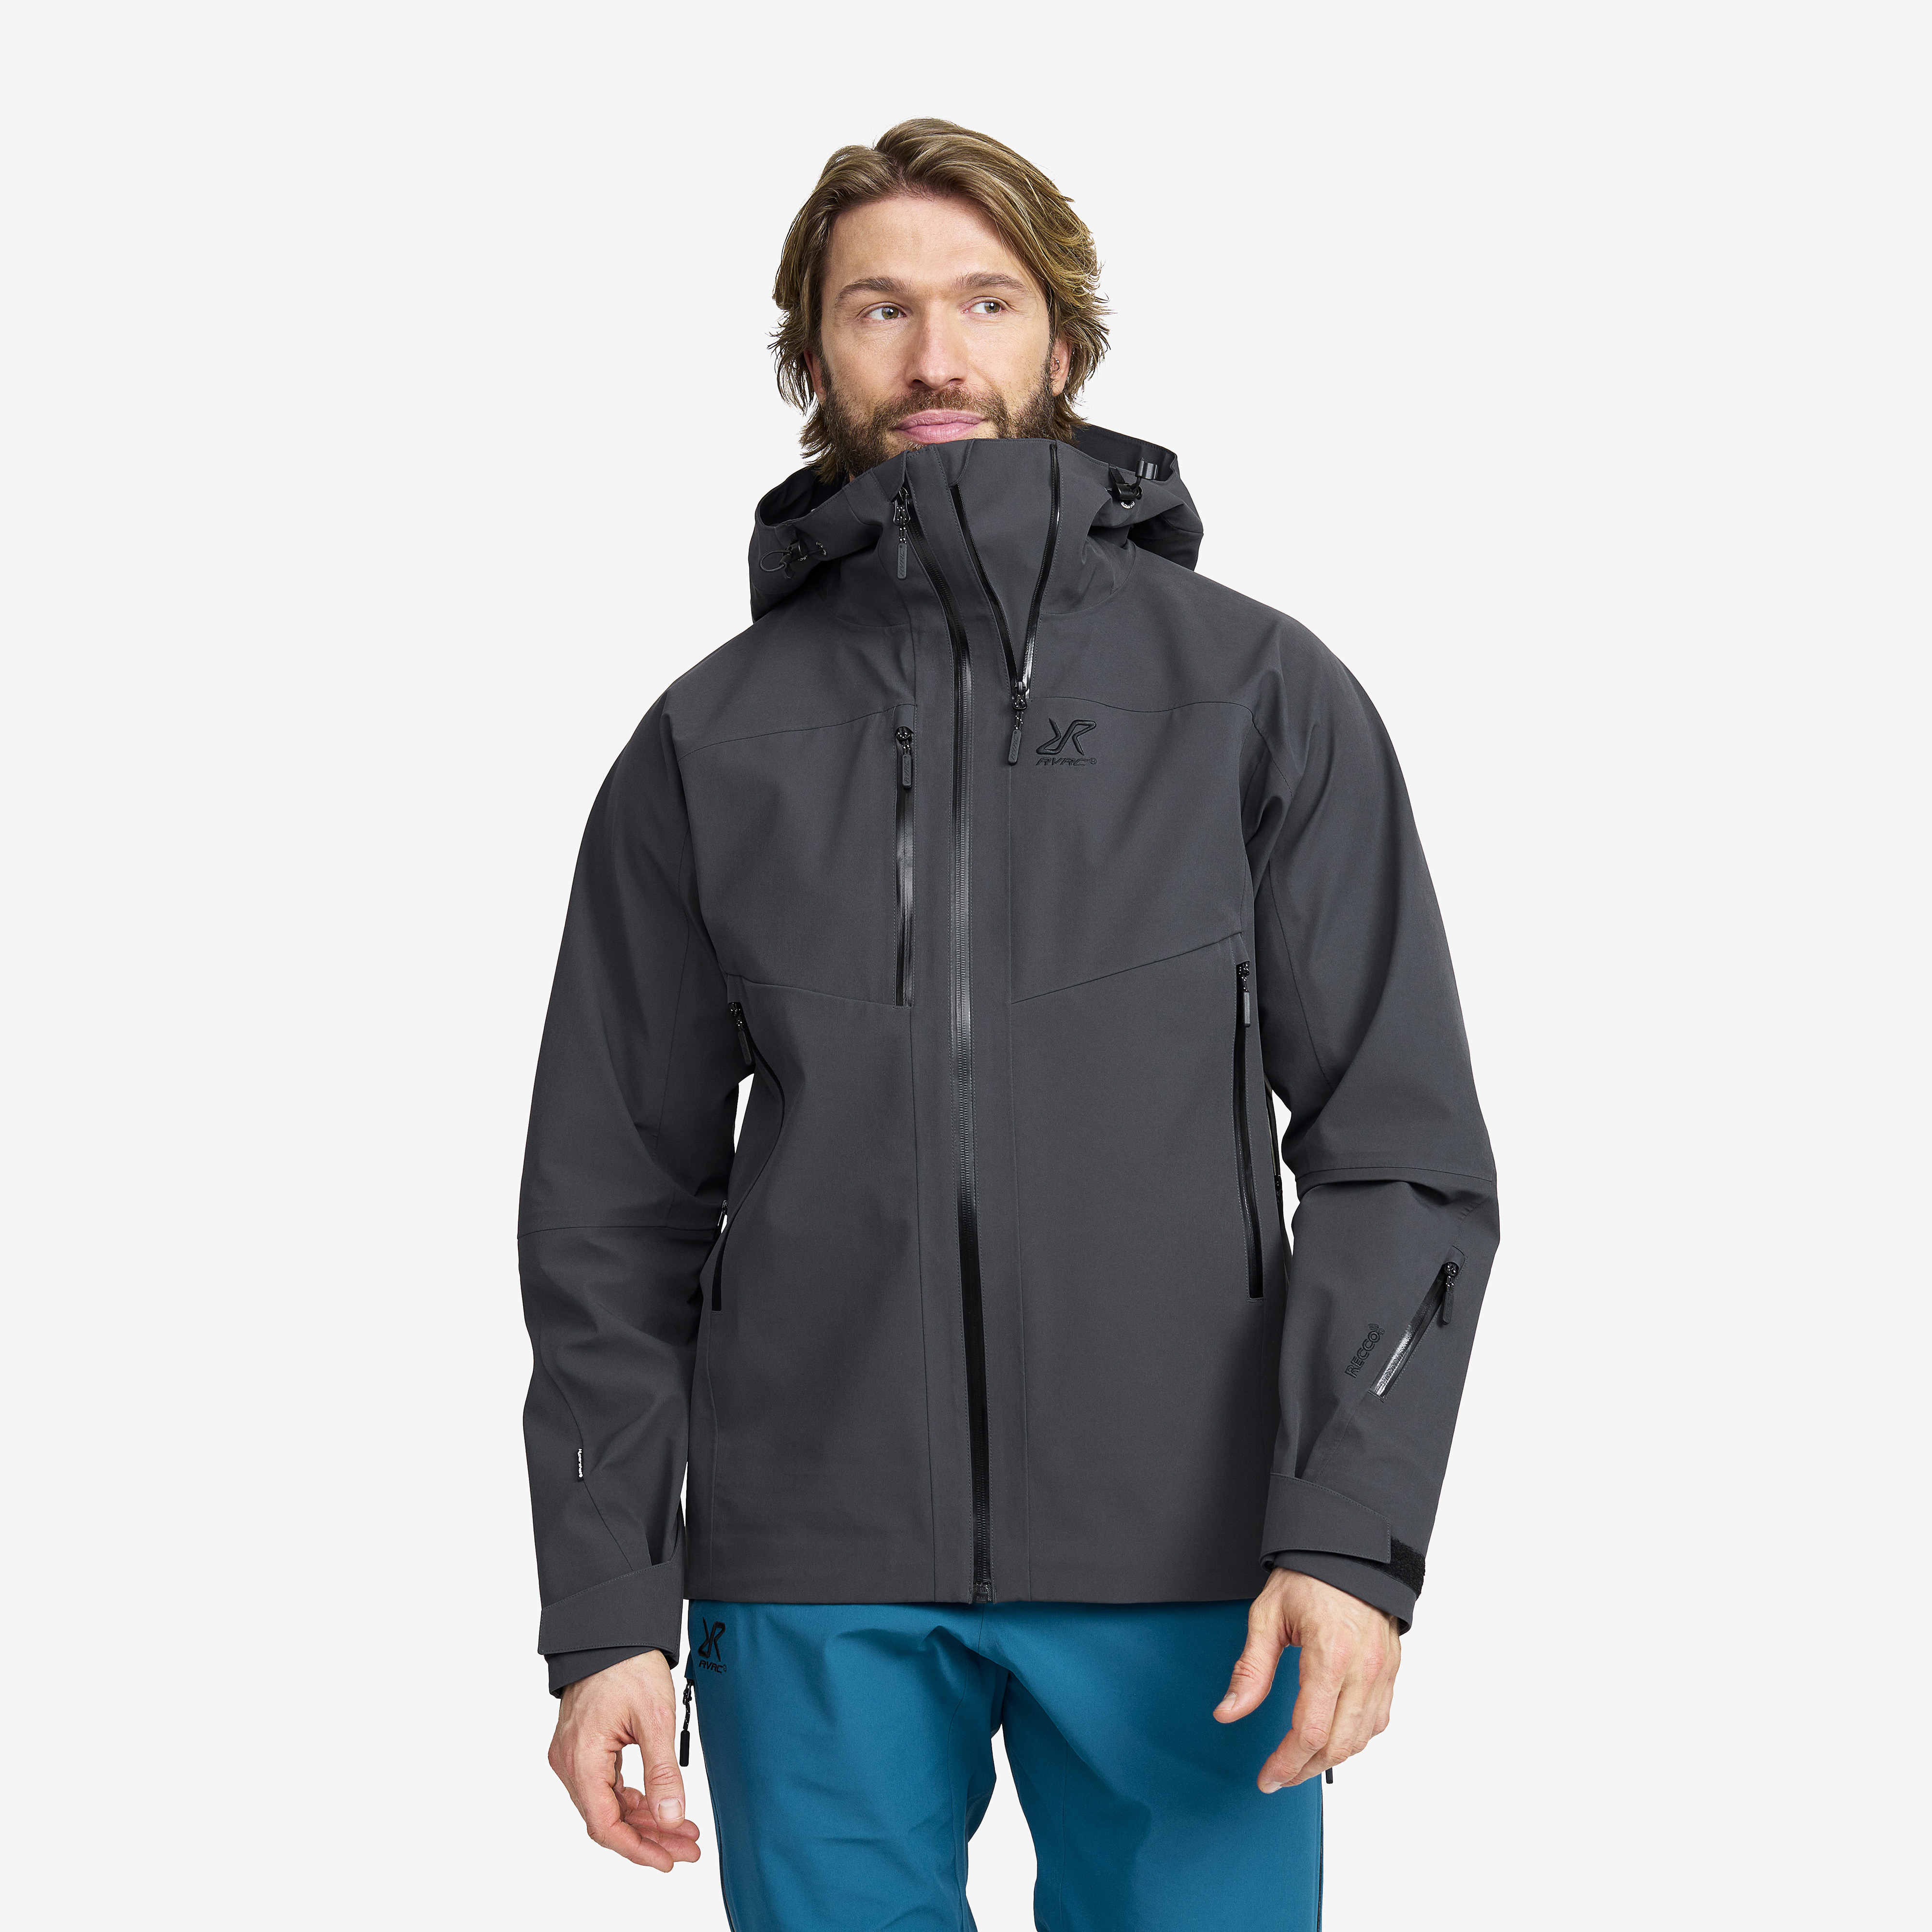 Cyclone 3L Shell Jacket Anthracite Men